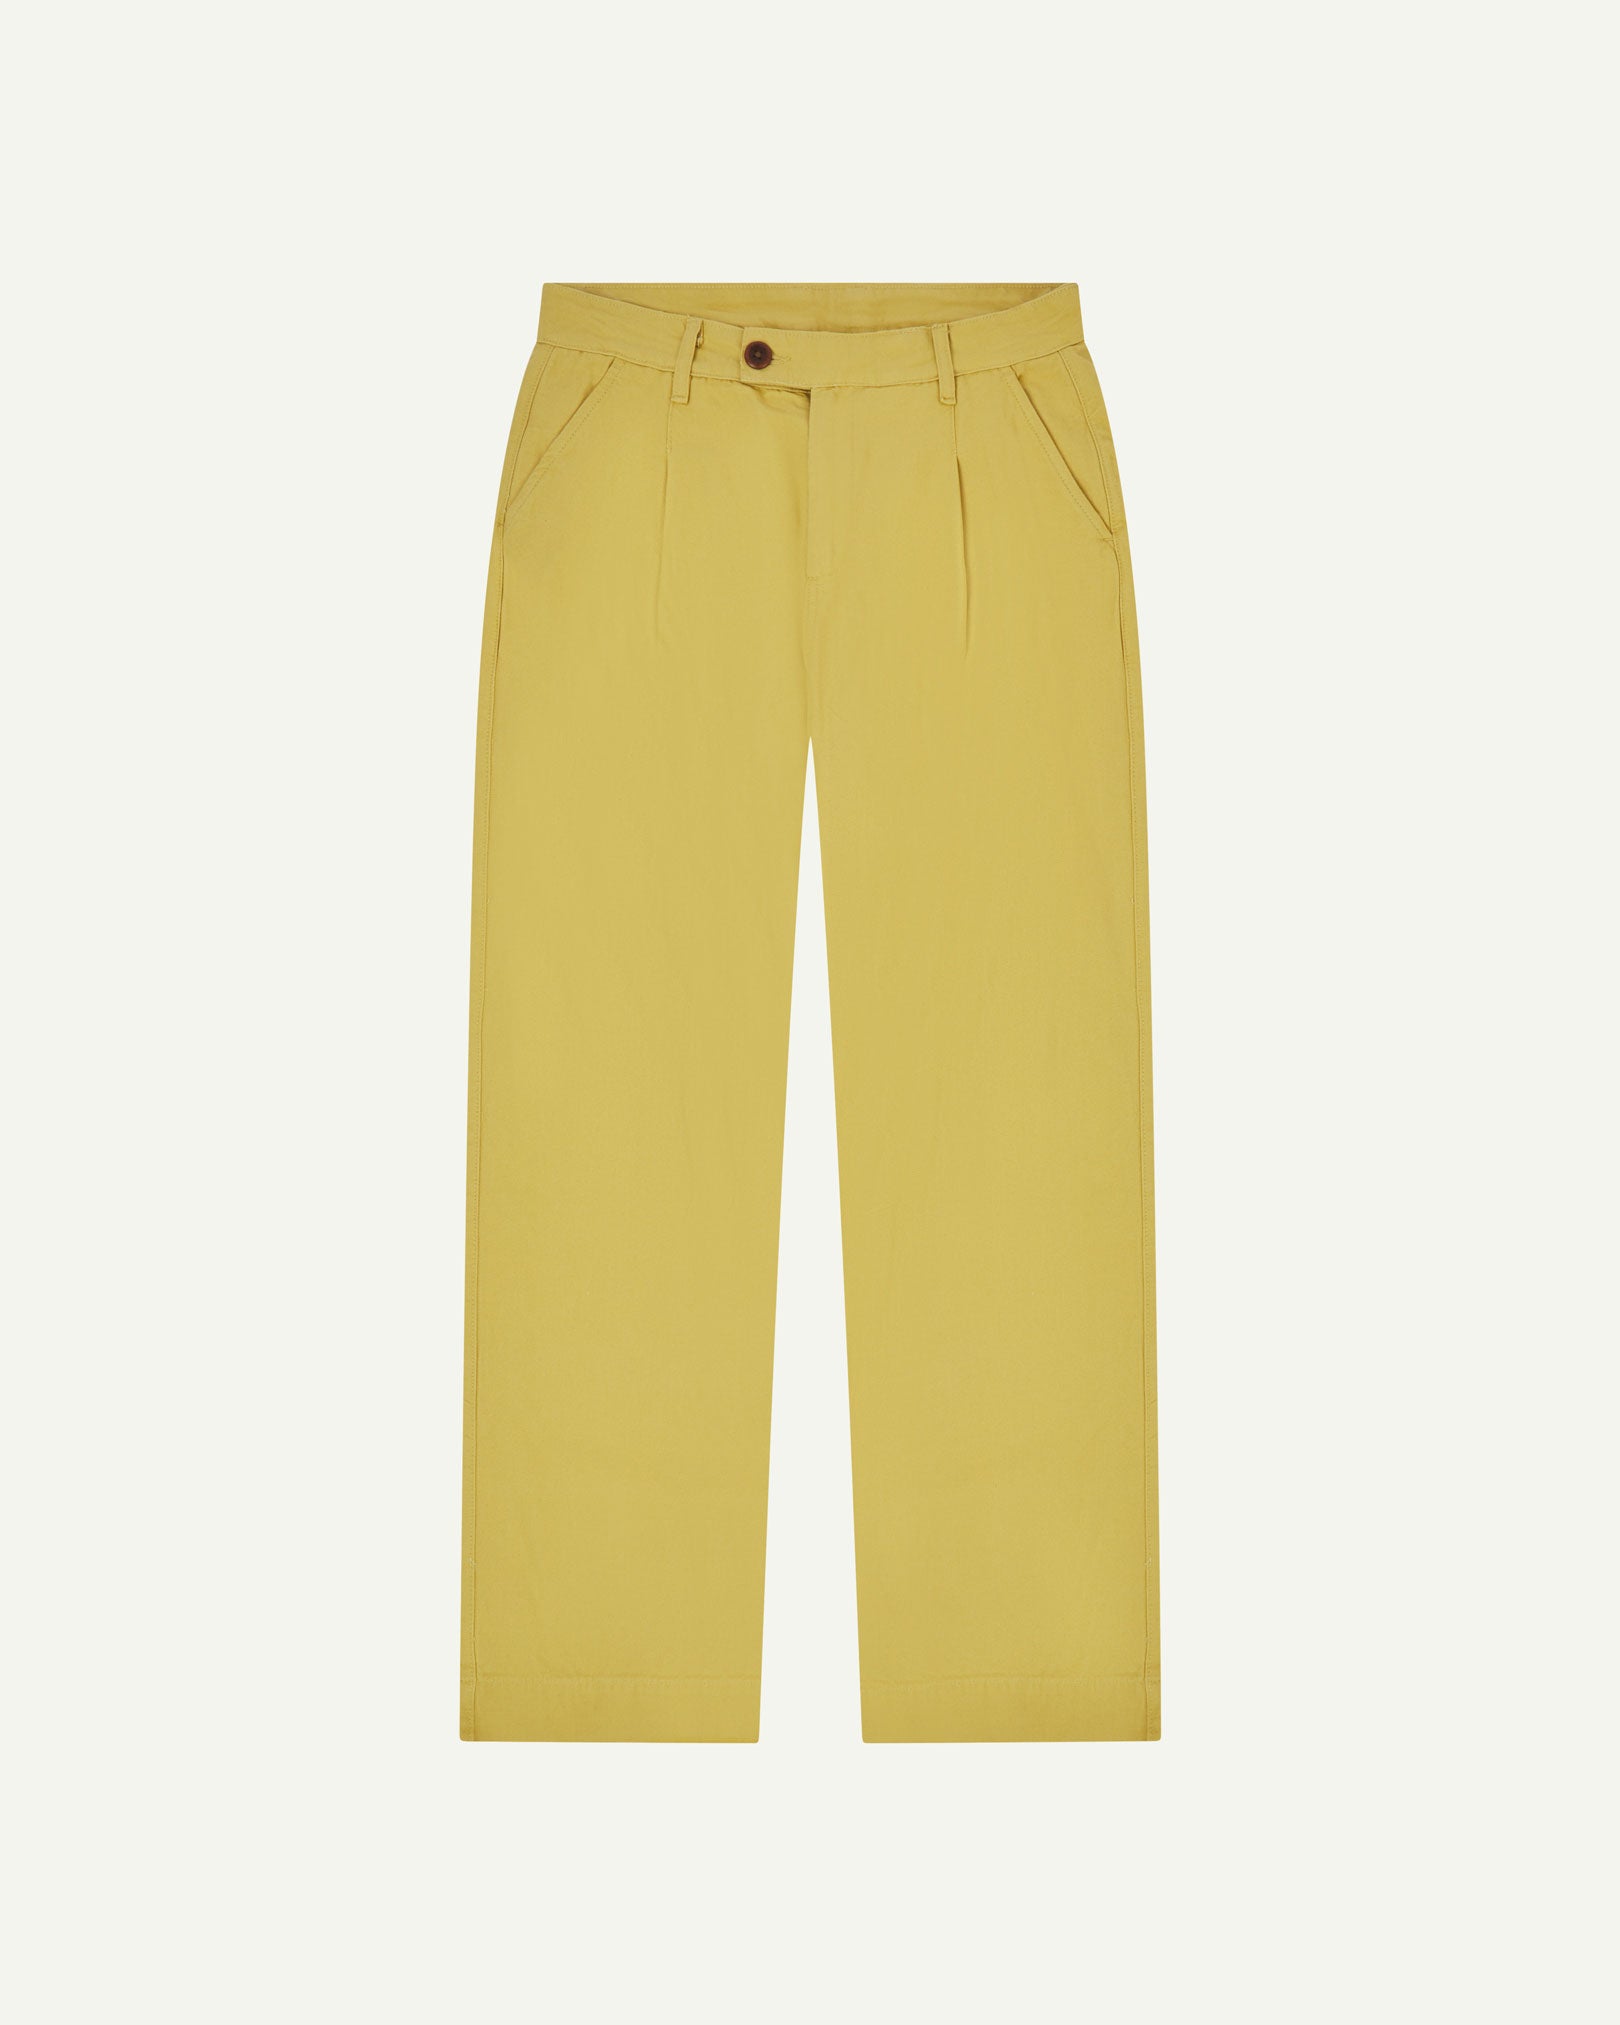 Front flat shot of 5018 Uskees men's organic mid-weight cotton boat trousers in acid yellow (citronella) showing contemporary wide leg style.